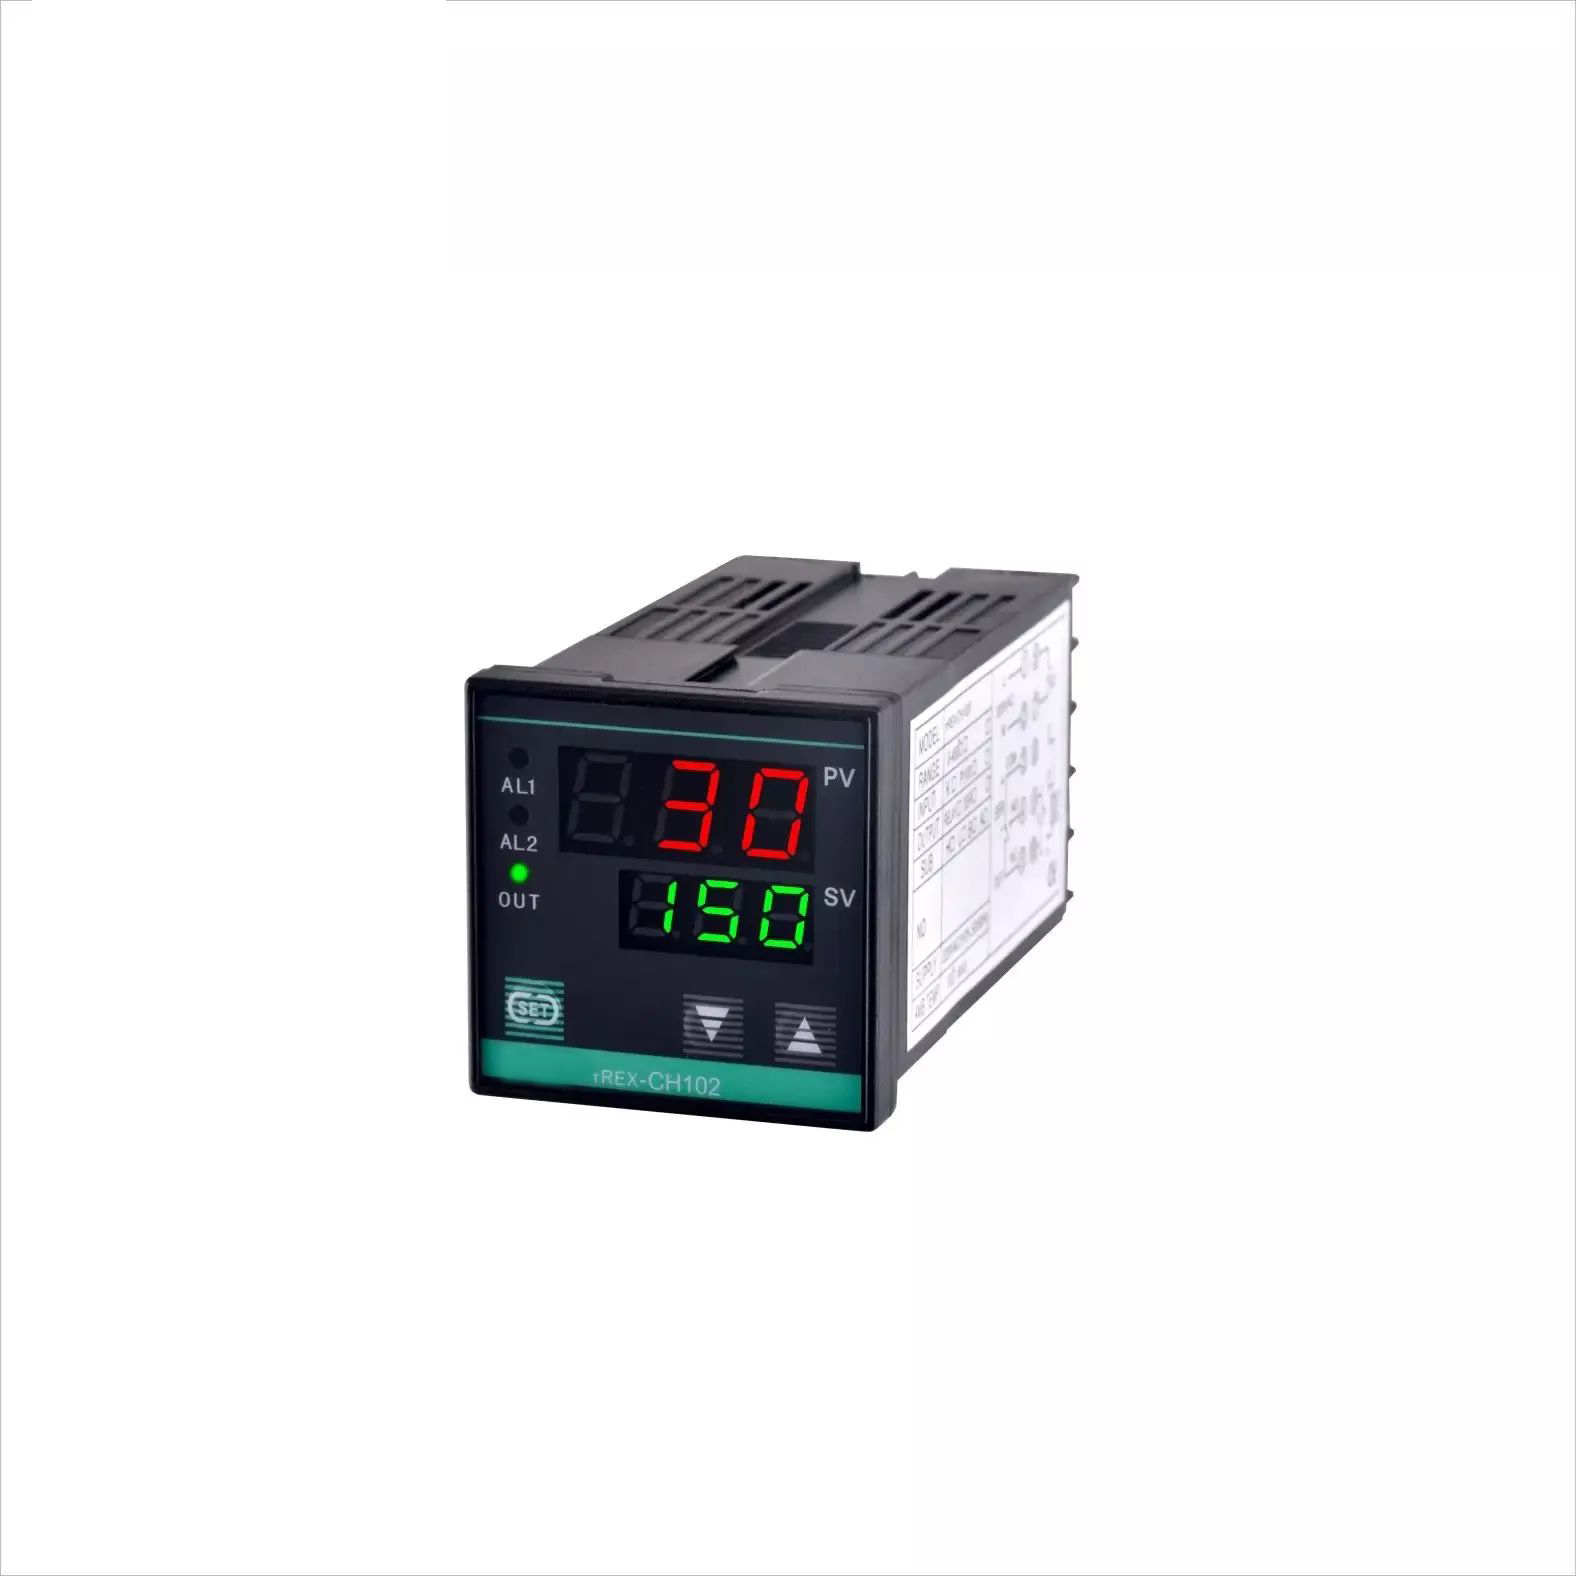 CH102 3 digit digital aiset pid ssr temperature controller for injection mechanical Featured Image